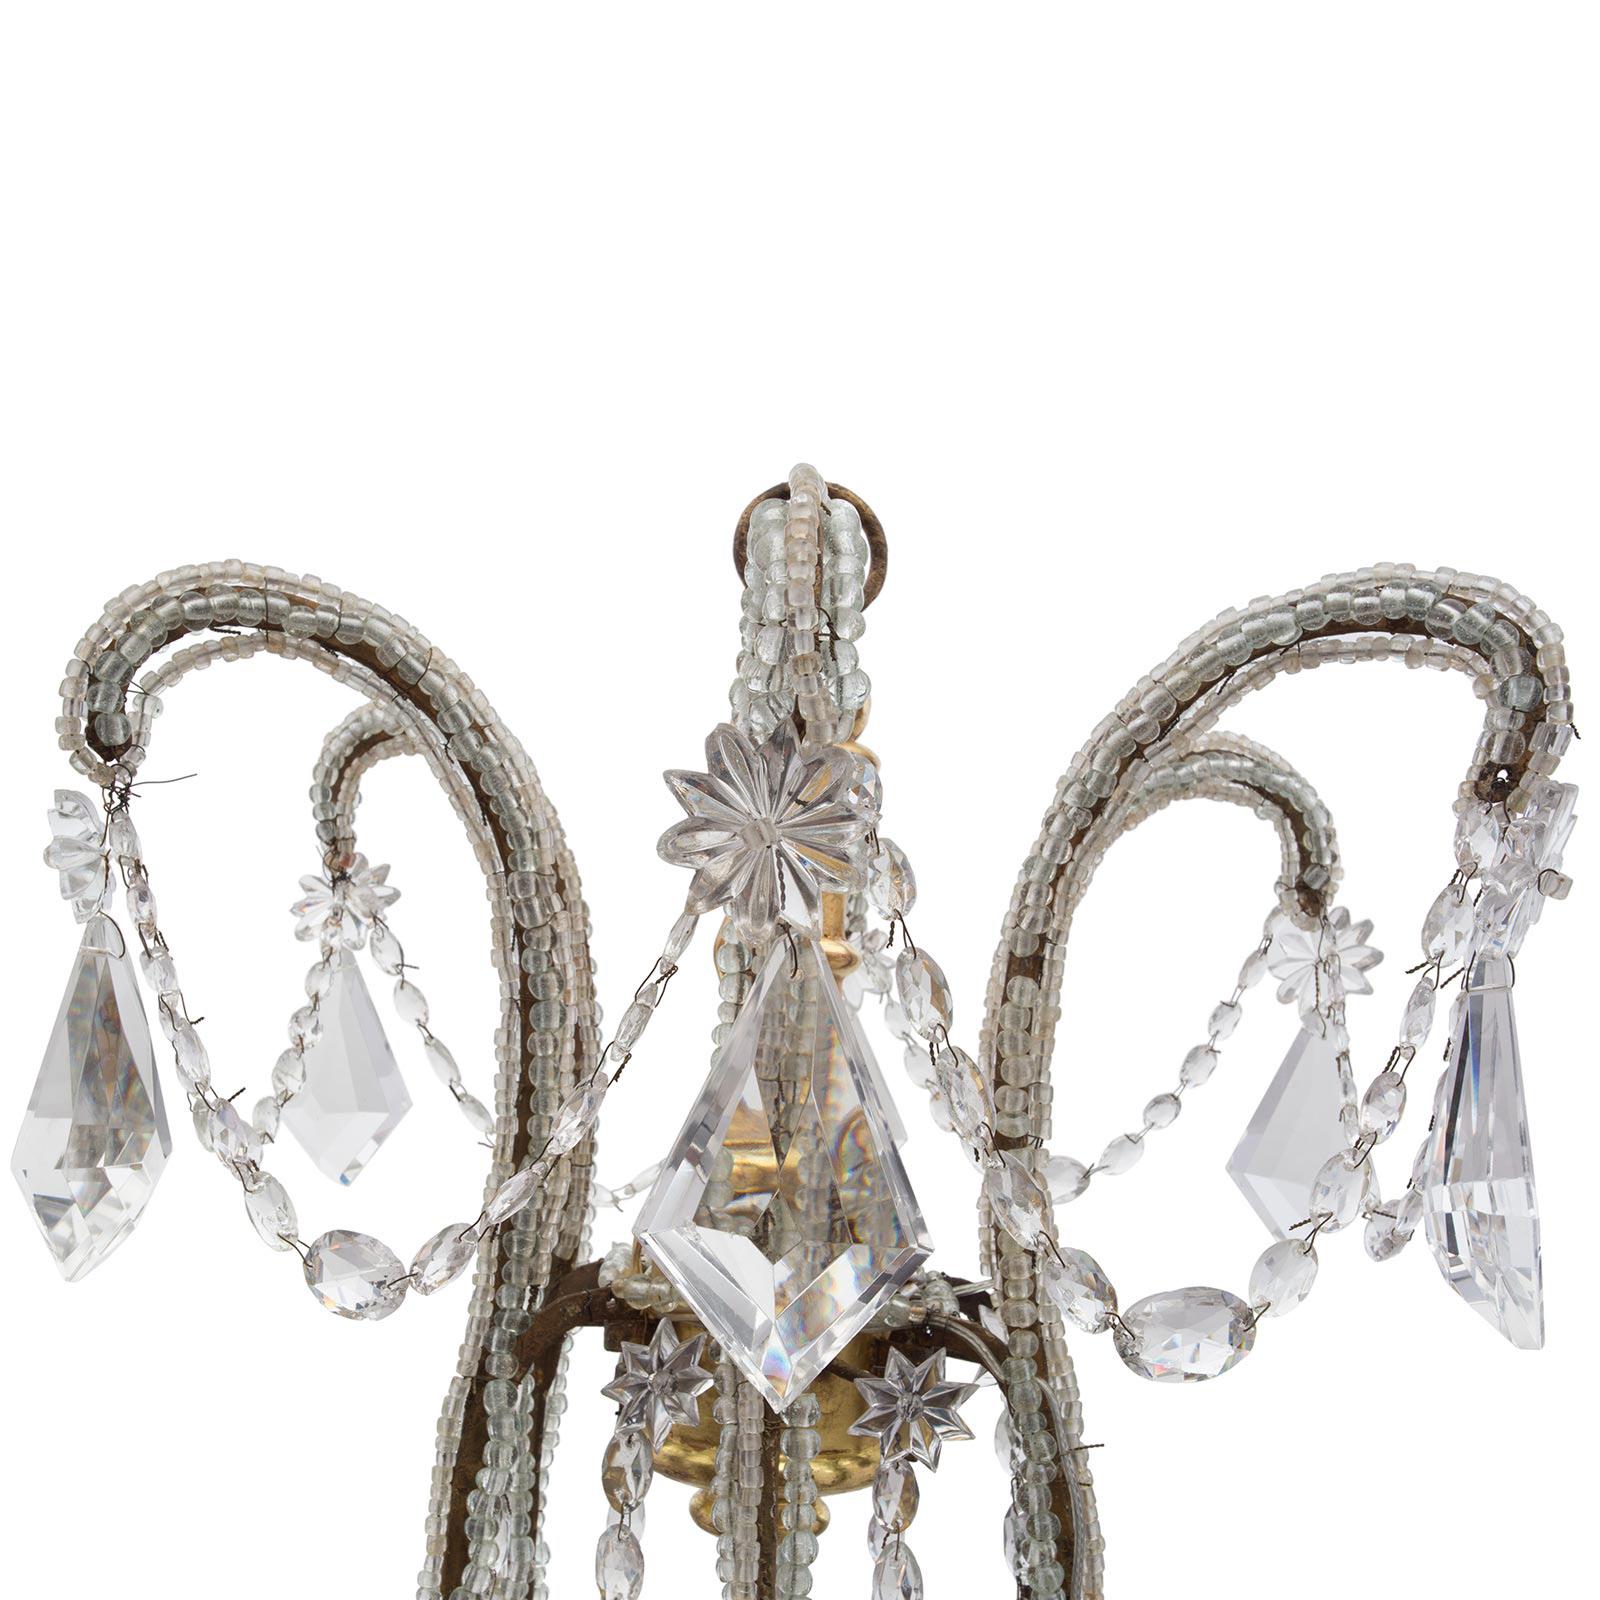 Italian 18th Century Louis XVI Period Gilt Metal, Giltwood & Crystal Chandelier In Good Condition For Sale In West Palm Beach, FL